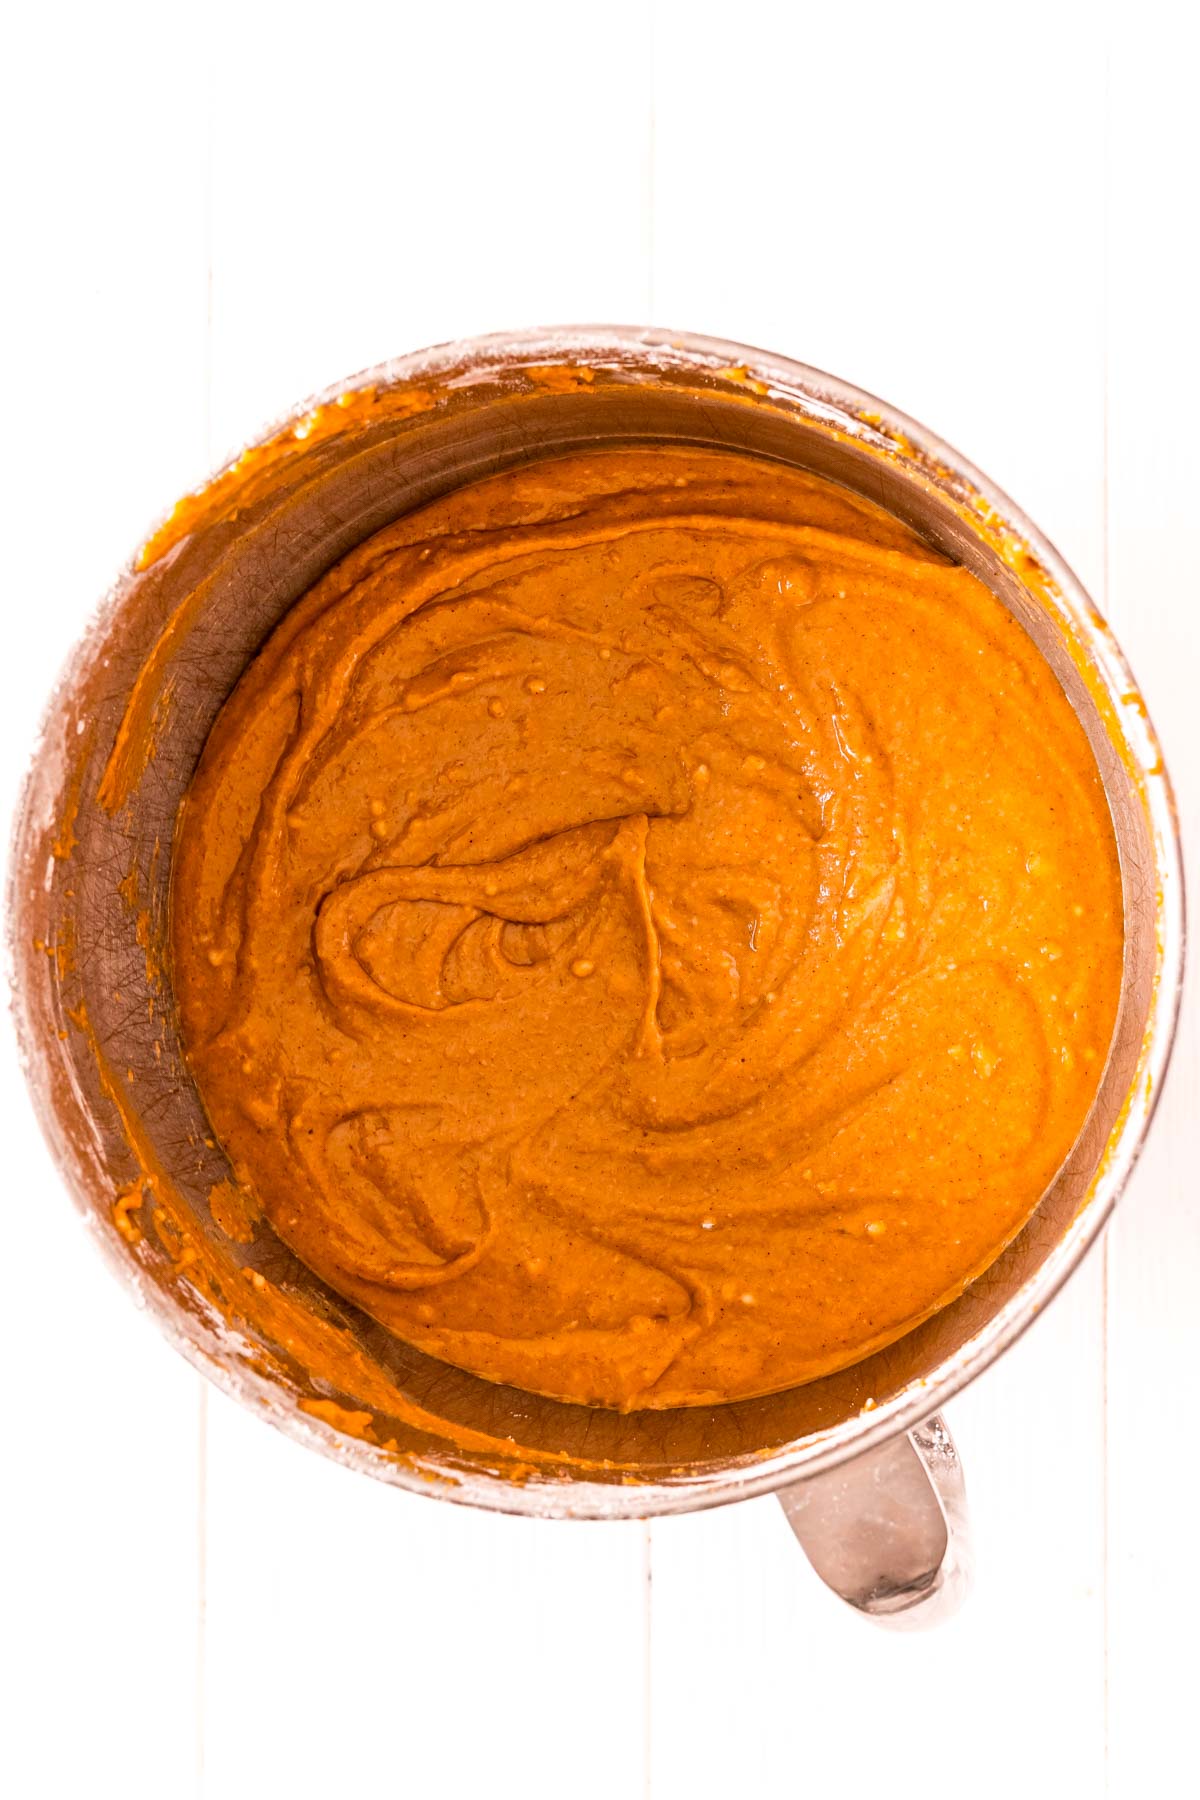 Overhead photo of pumpkin cake batter in a stainless steel mixing bowl.